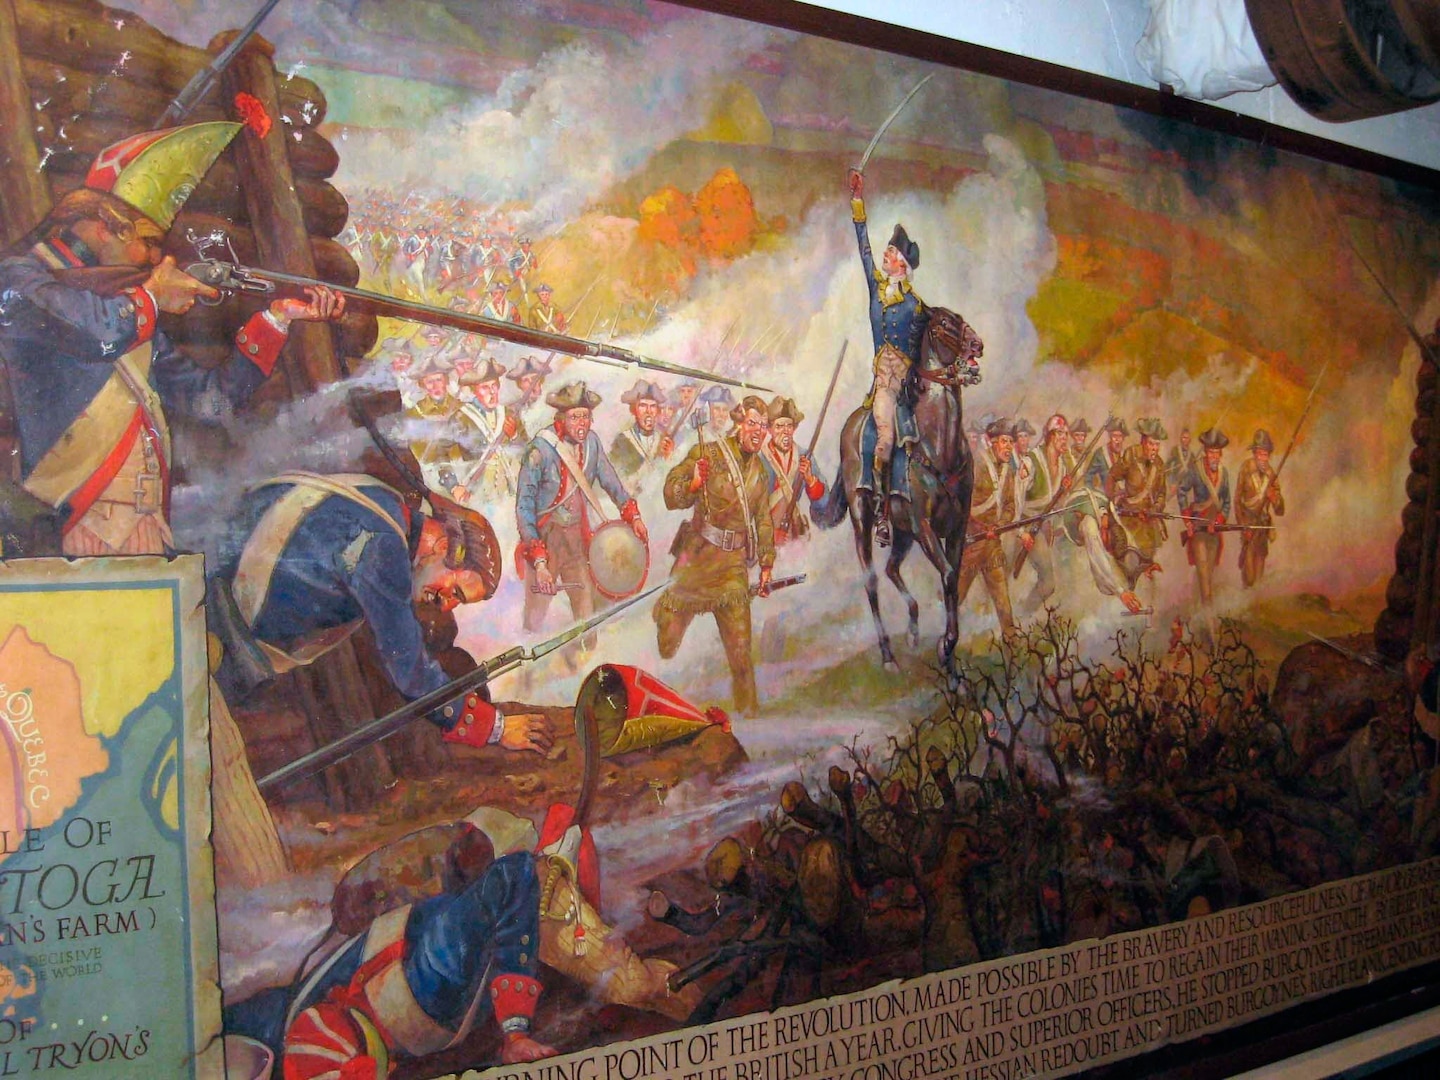 A detail from the mural "Benedict Arnold, Triumphant at Saratoga," by military artist George Gray, depicts the moment on Oct. 7, 1777, when American Gen. Benedict Arnold, despite an order from Gen. Horatio Gates confining him to quarters, led the Continental Army to victory during the Battle of Bemis Heights, a part of the larger Battle of Saratoga.